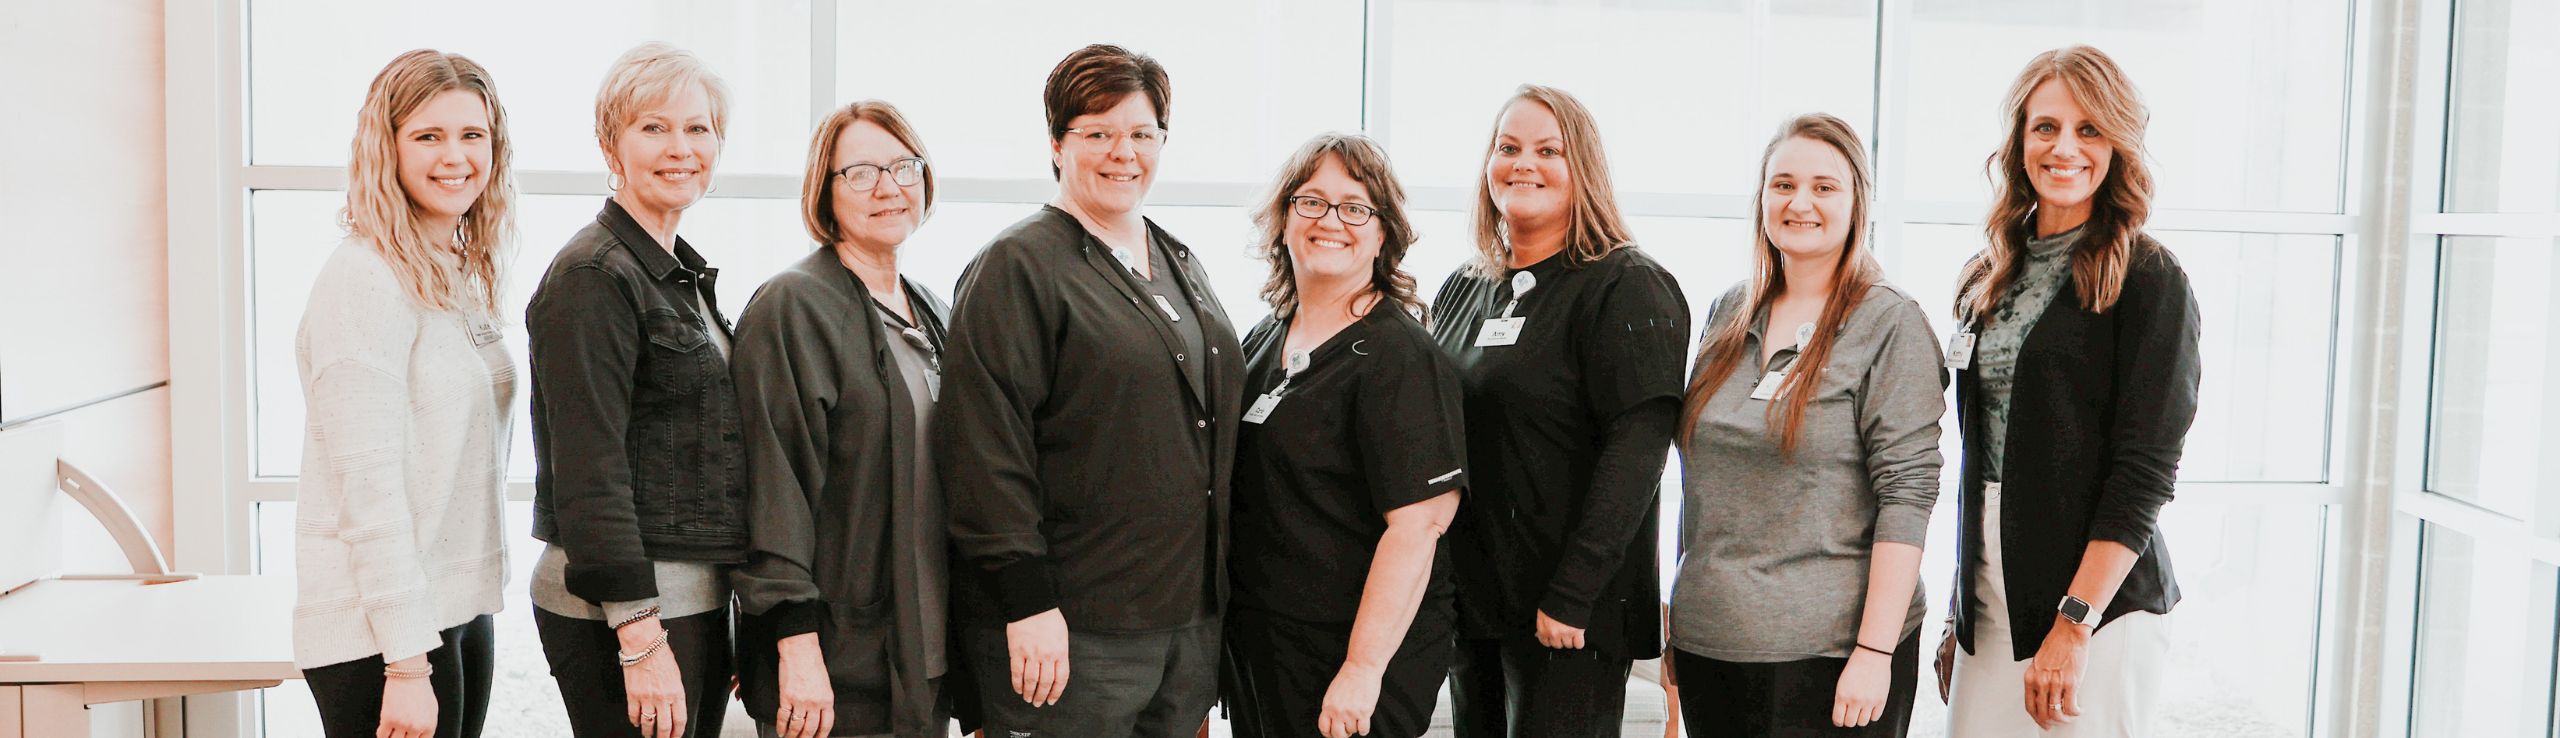 Outpatient Team at Hegg Health Center in Rock Valley, IA